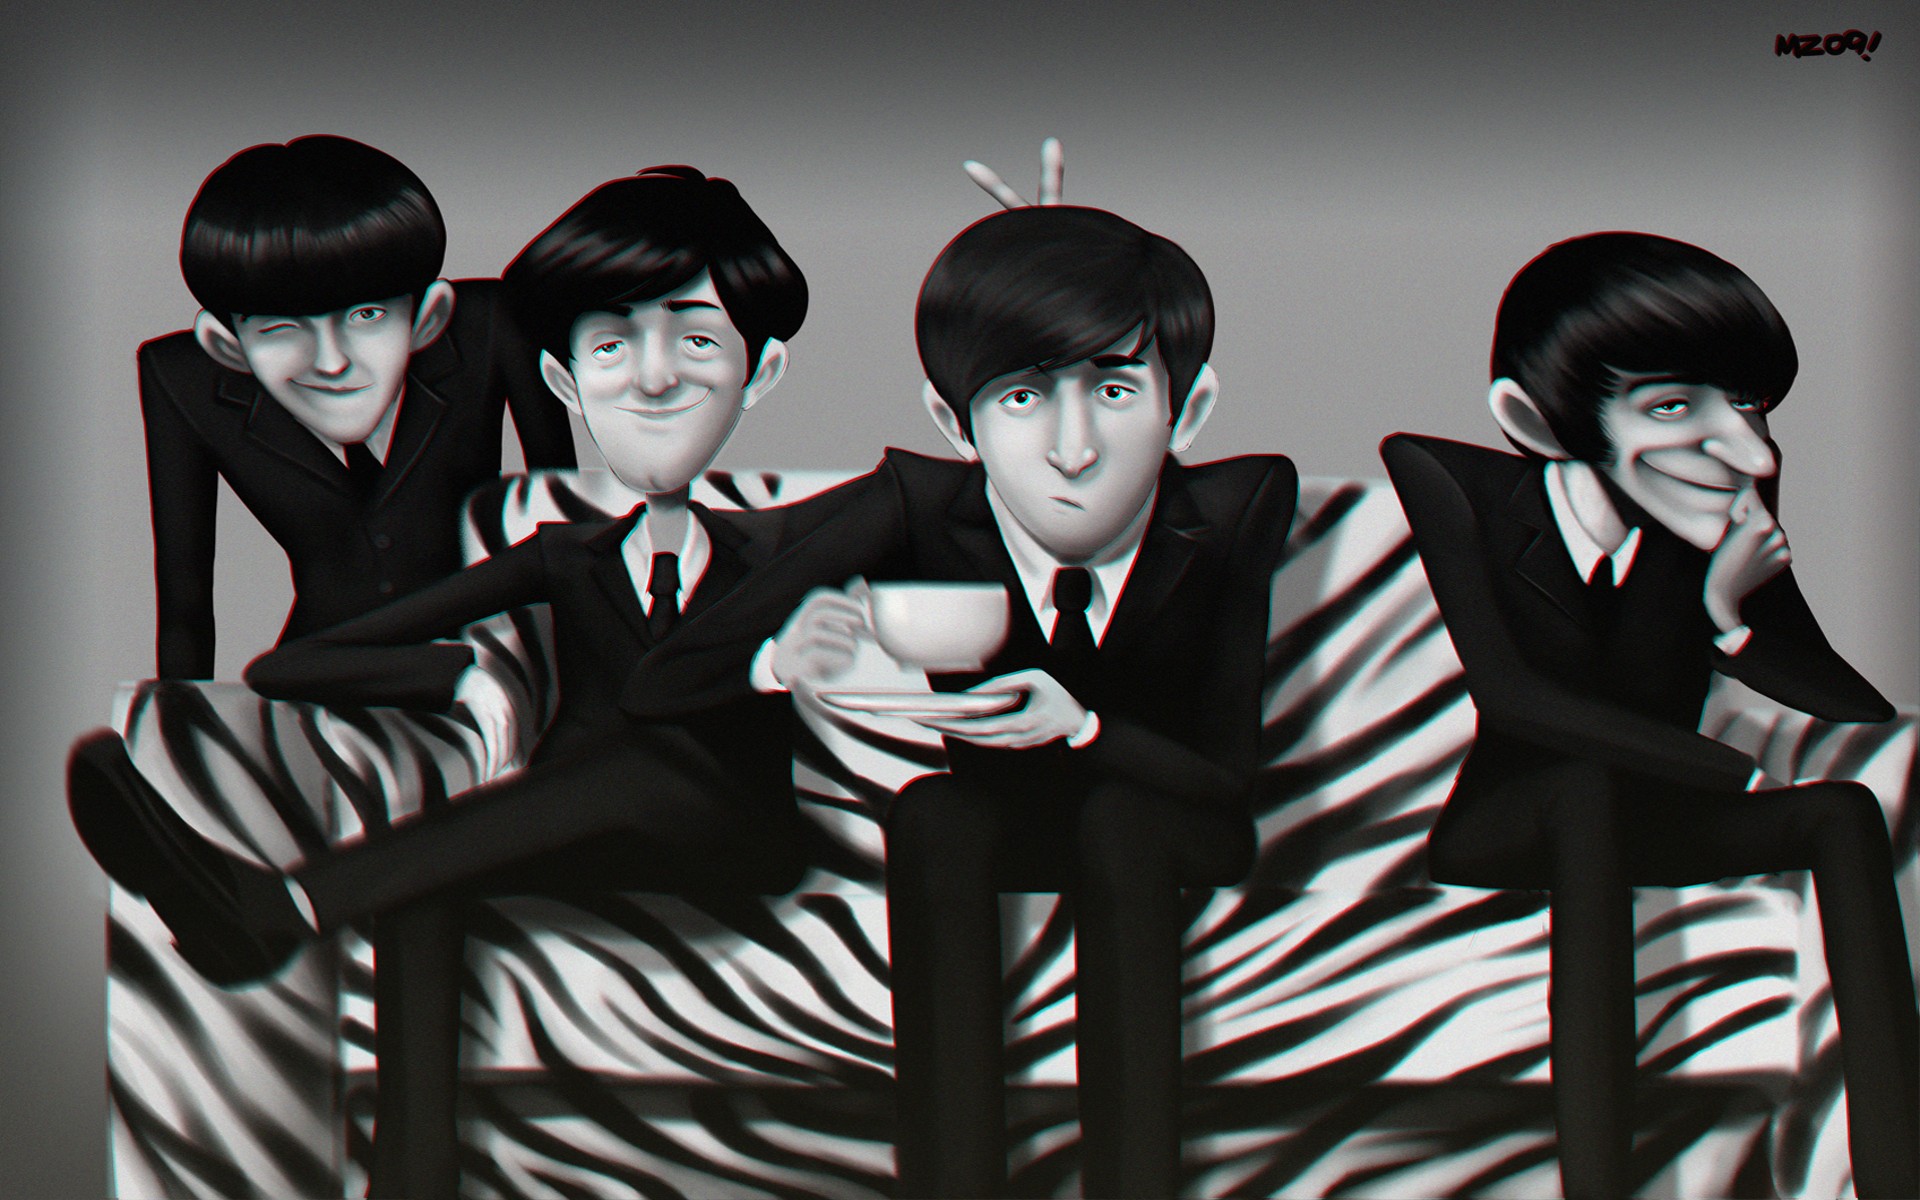 General 1920x1200 The Beatles band gray humor music cup hand gesture caricature